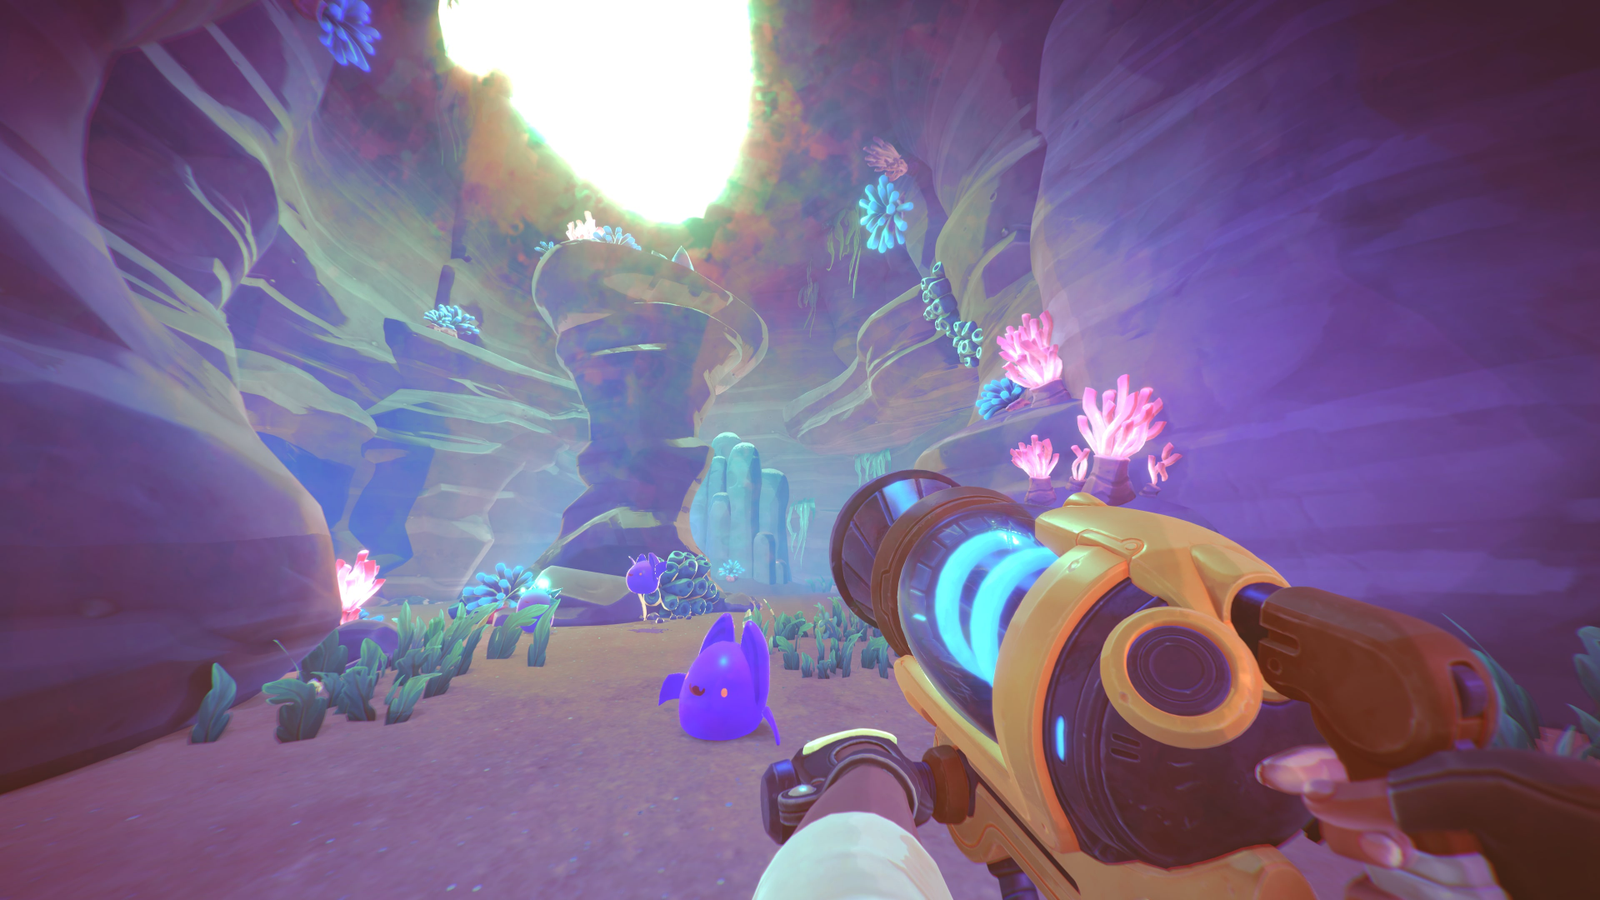 Slime Rancher 2: Release date, trailers, gameplay, and more